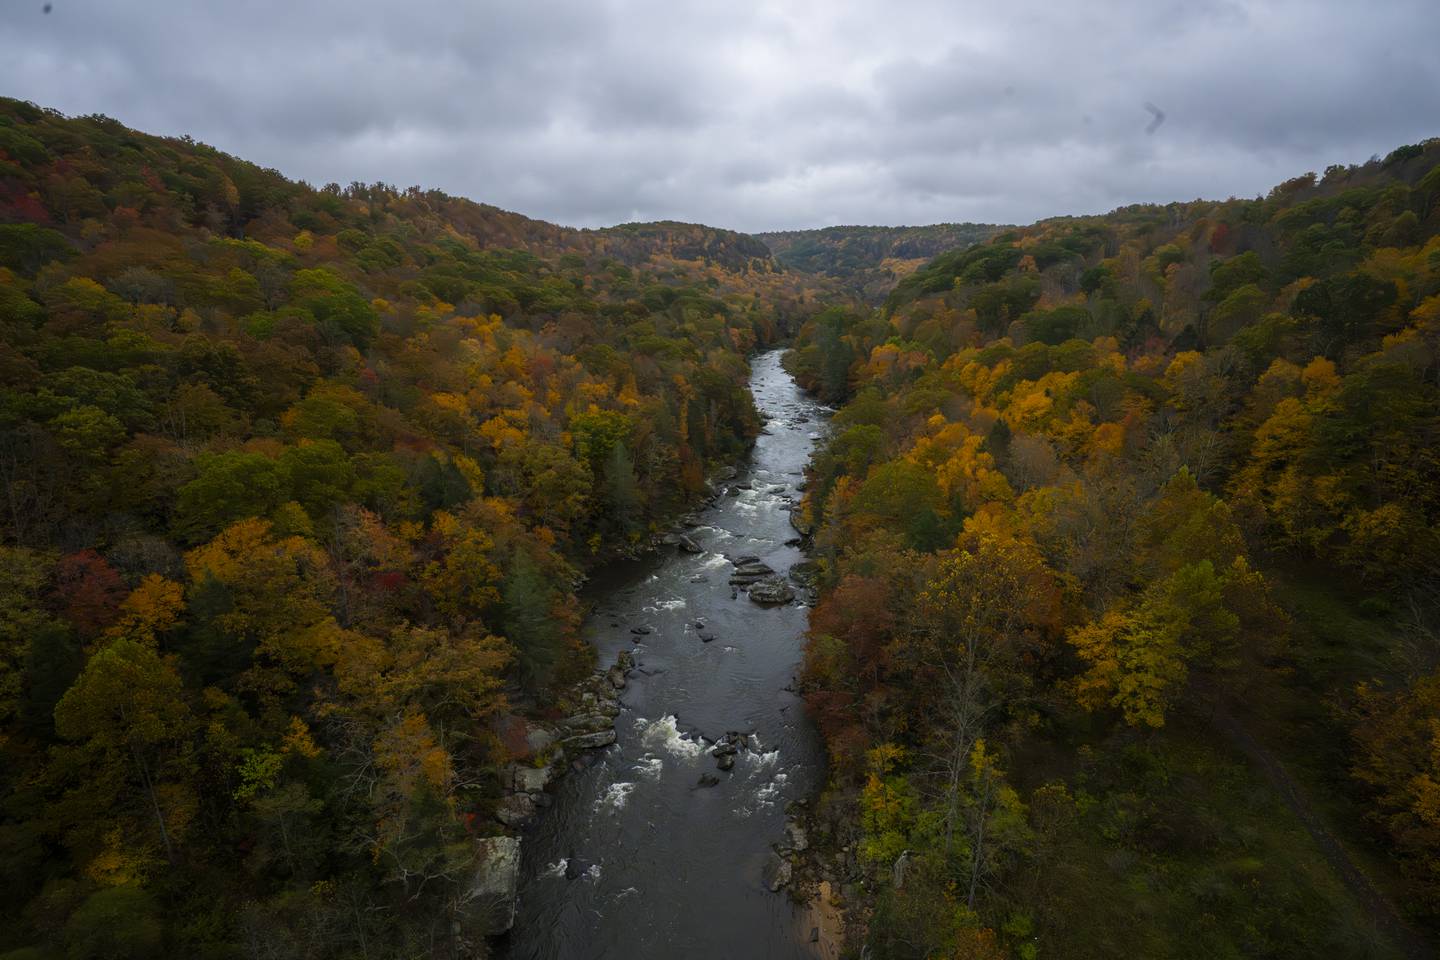 Fall foilage is at its peak during the third weekend of October in West Virginia.